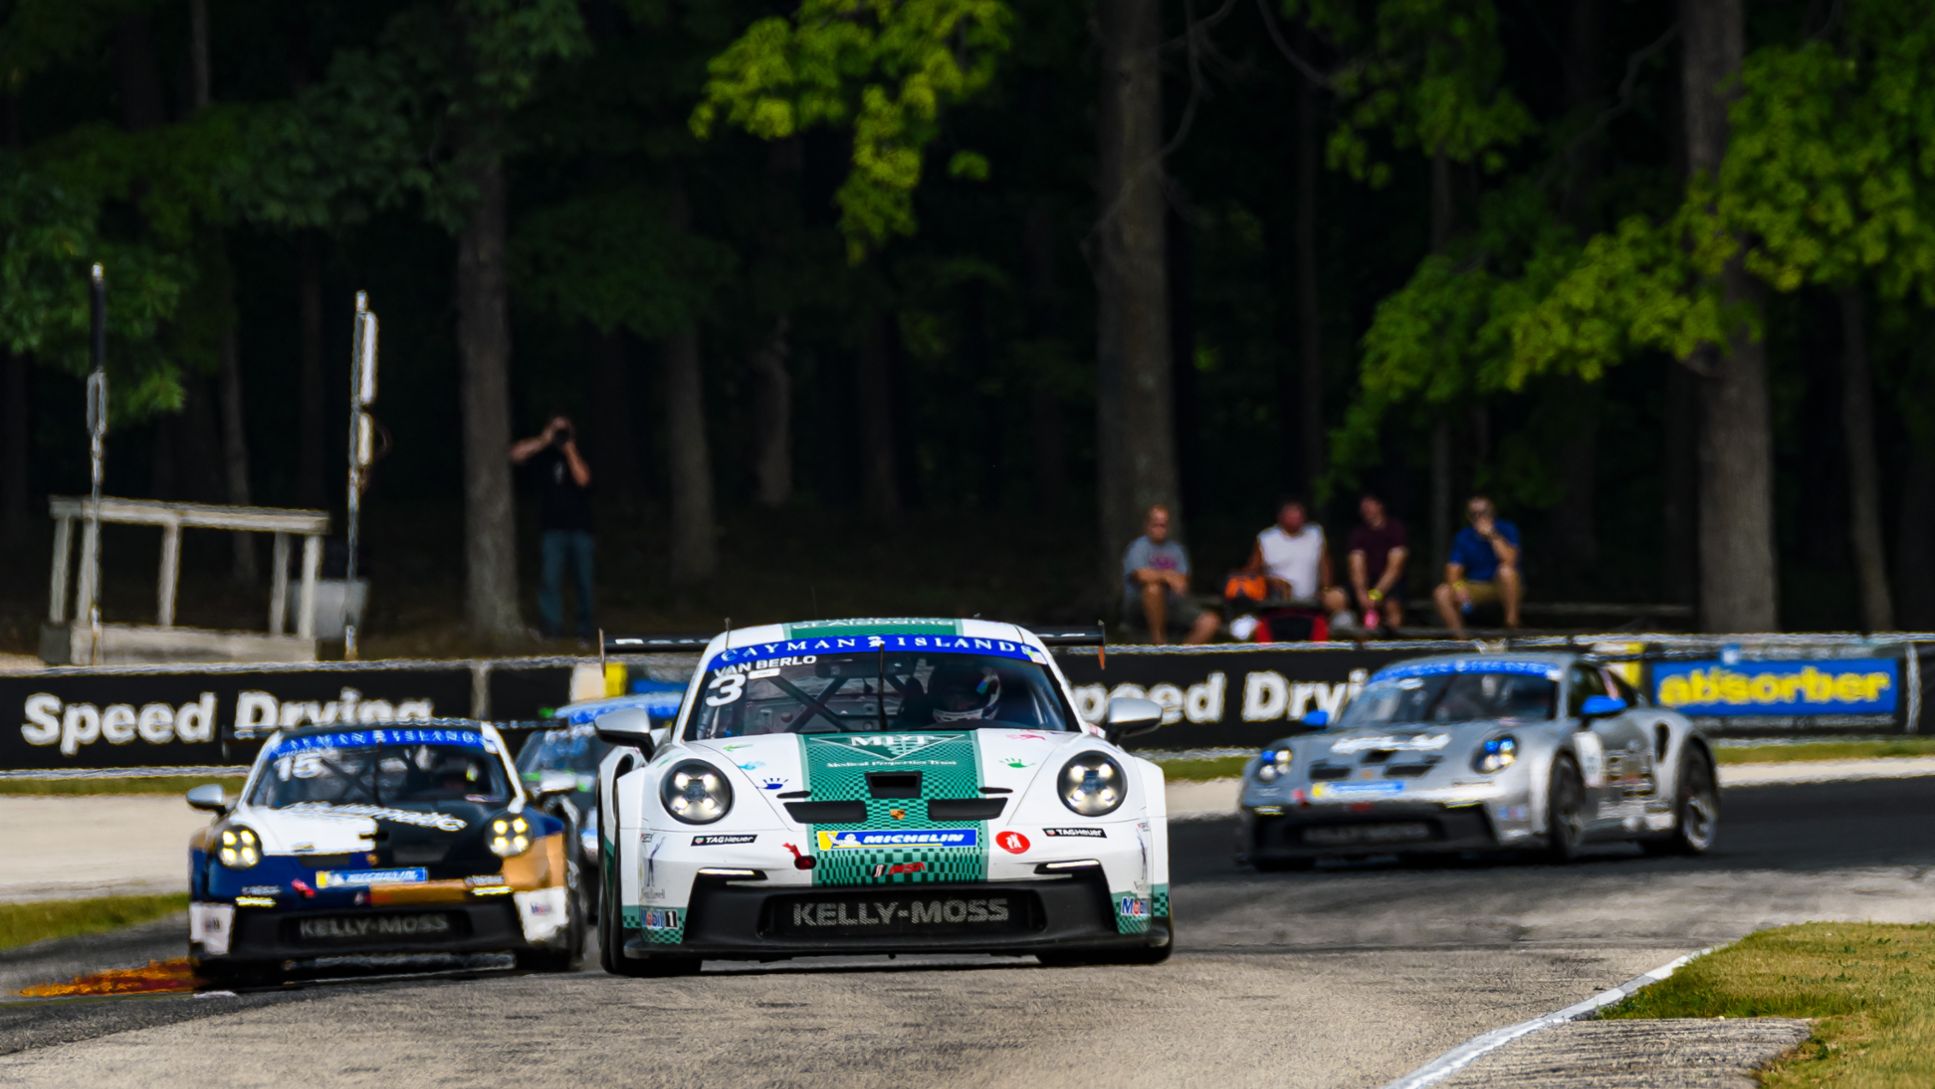 No. 3 Kelly-Moss Road and Race - Kay van Berlo (Netherlands), 911 GT3 Cup, Porsche Carrera Cup North America Presented by the Cayman Islands - Road America - Aug 6 - 8 - Road America, Elkhart Lake Wisconsin, USA